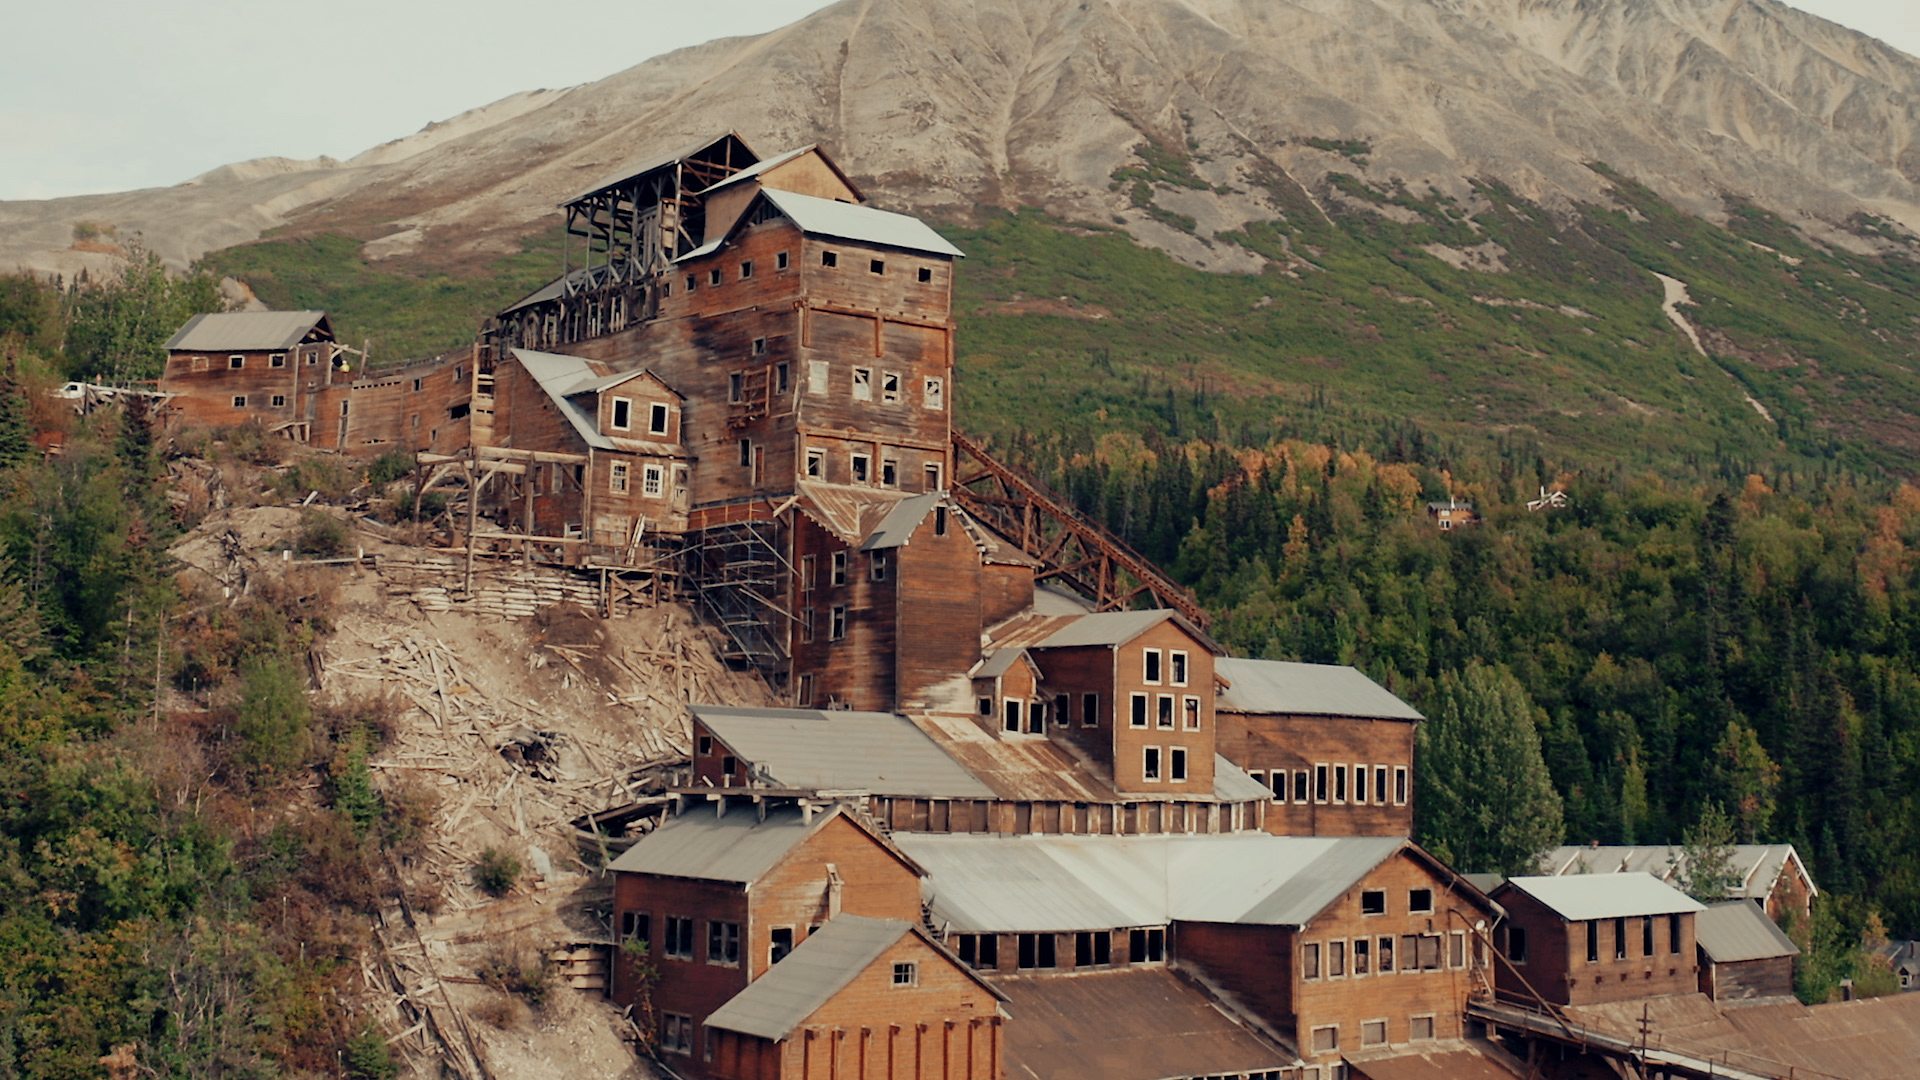 The picturesque ghost town at the end of the world